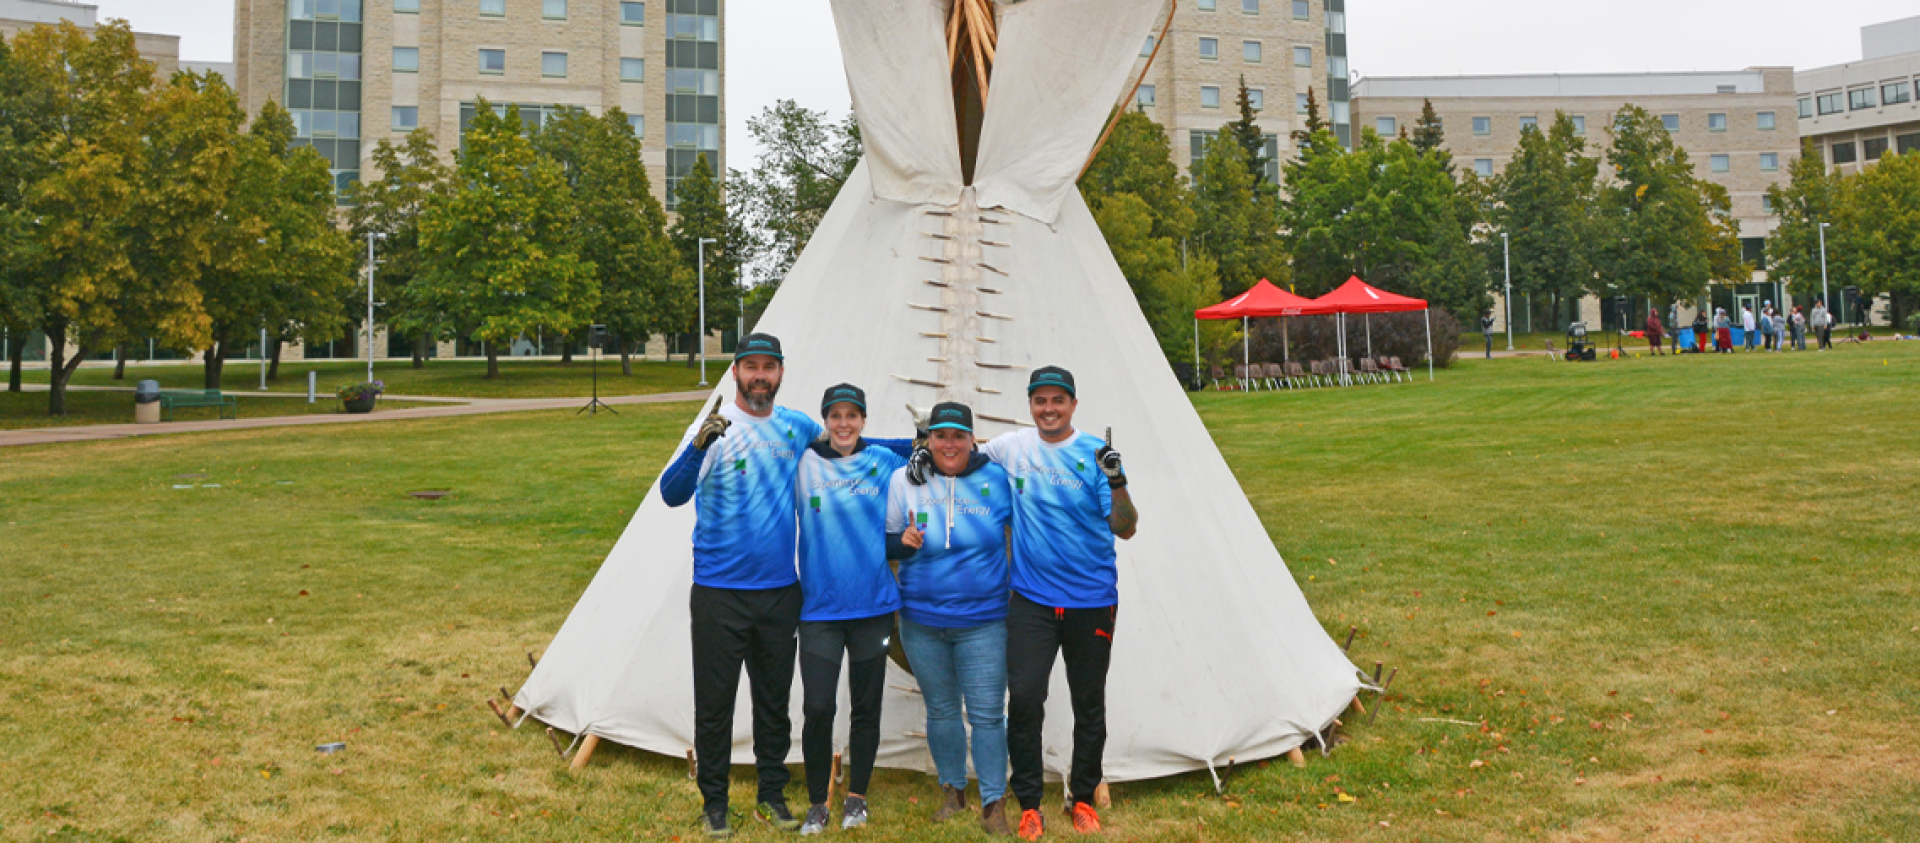 Four employees wearing matching blue shirts stand in front of the tipi they built. 